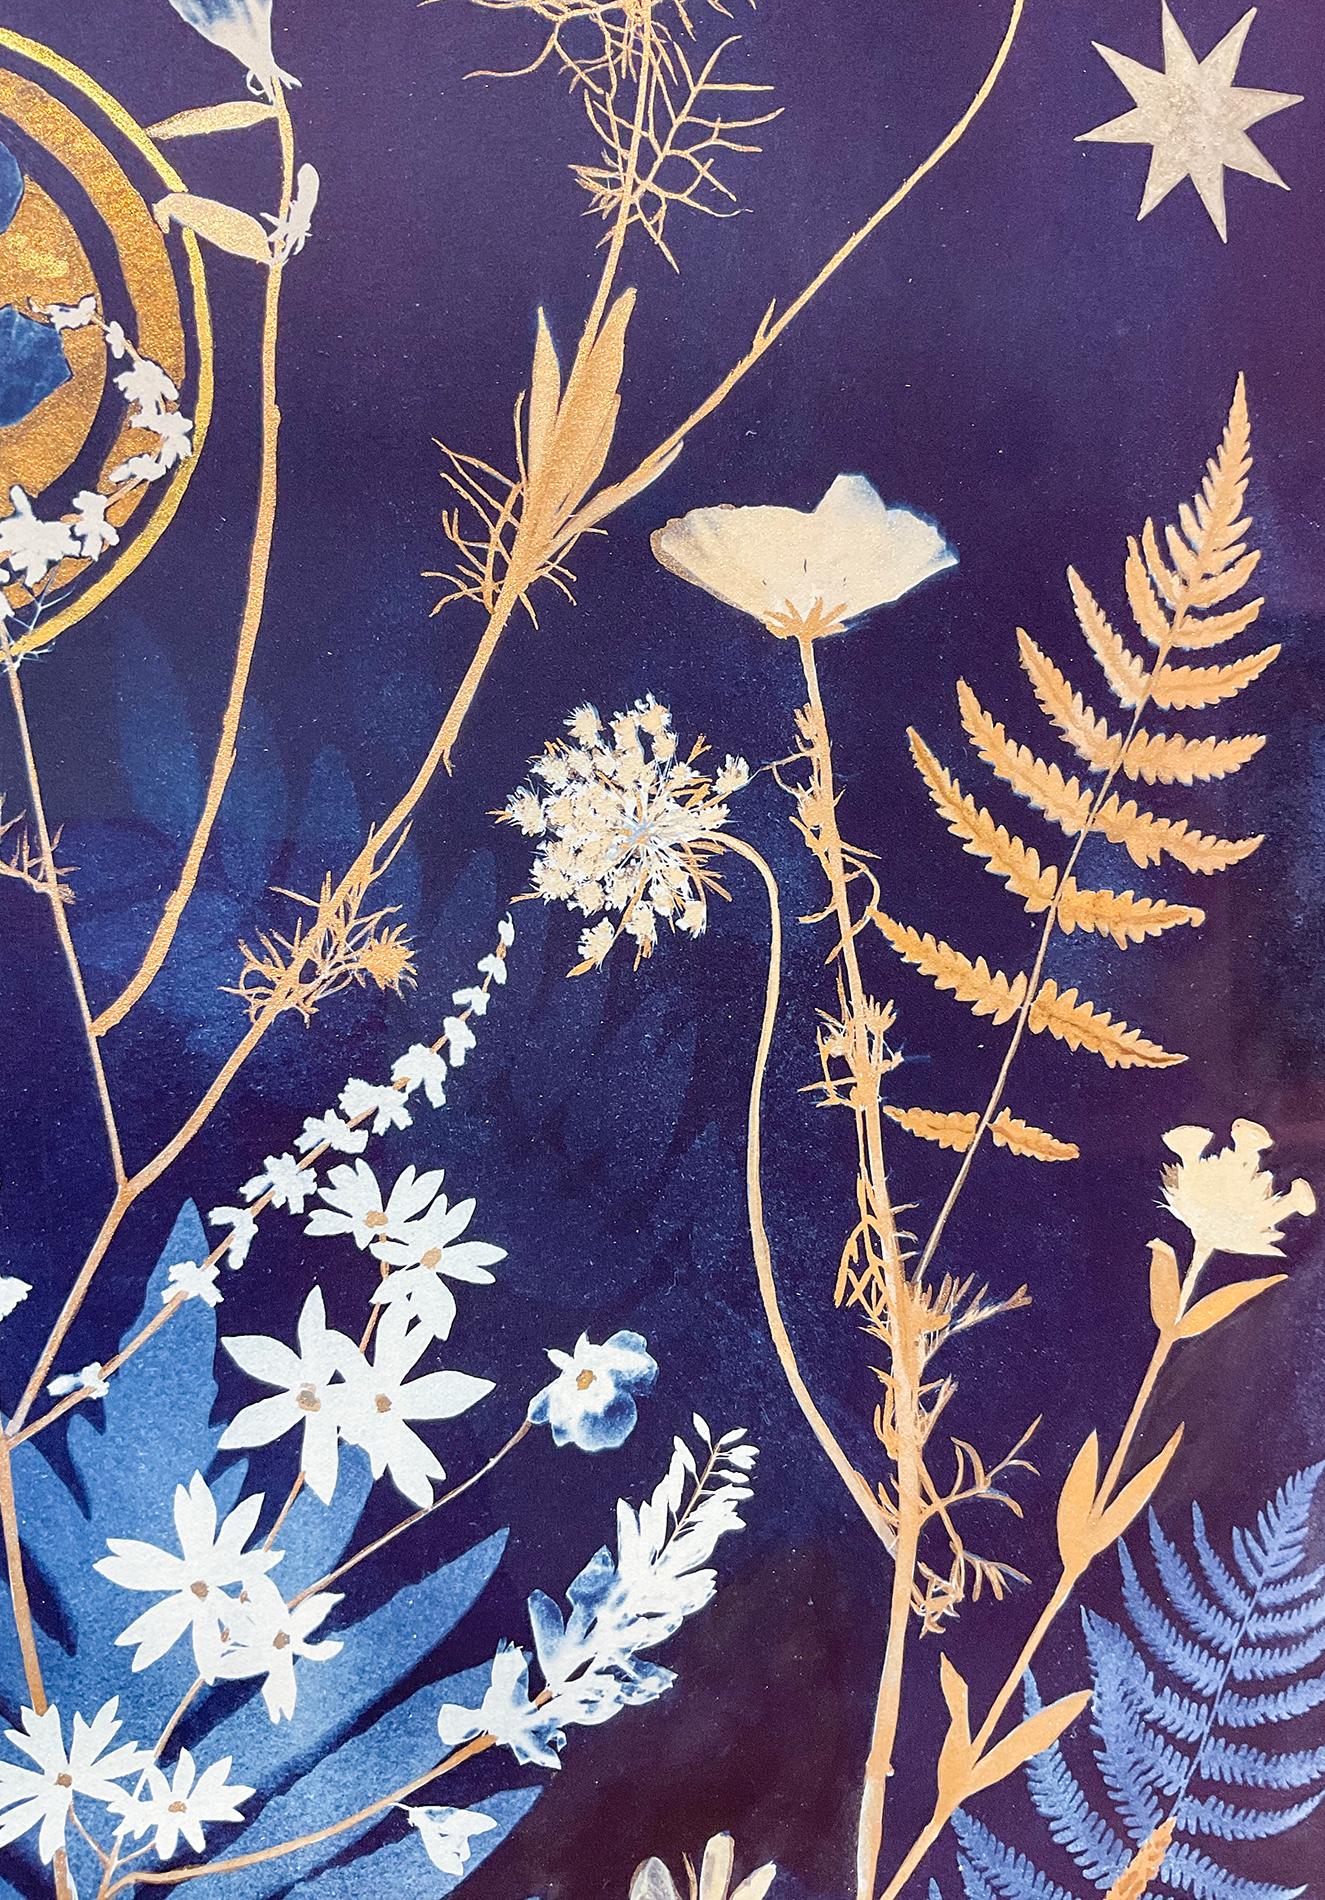 Gold Ferns, Cosmos (Still Life Painting of Gold Flowers on Indigo Blue)  - Purple Figurative Painting by Julia Whitney Barnes